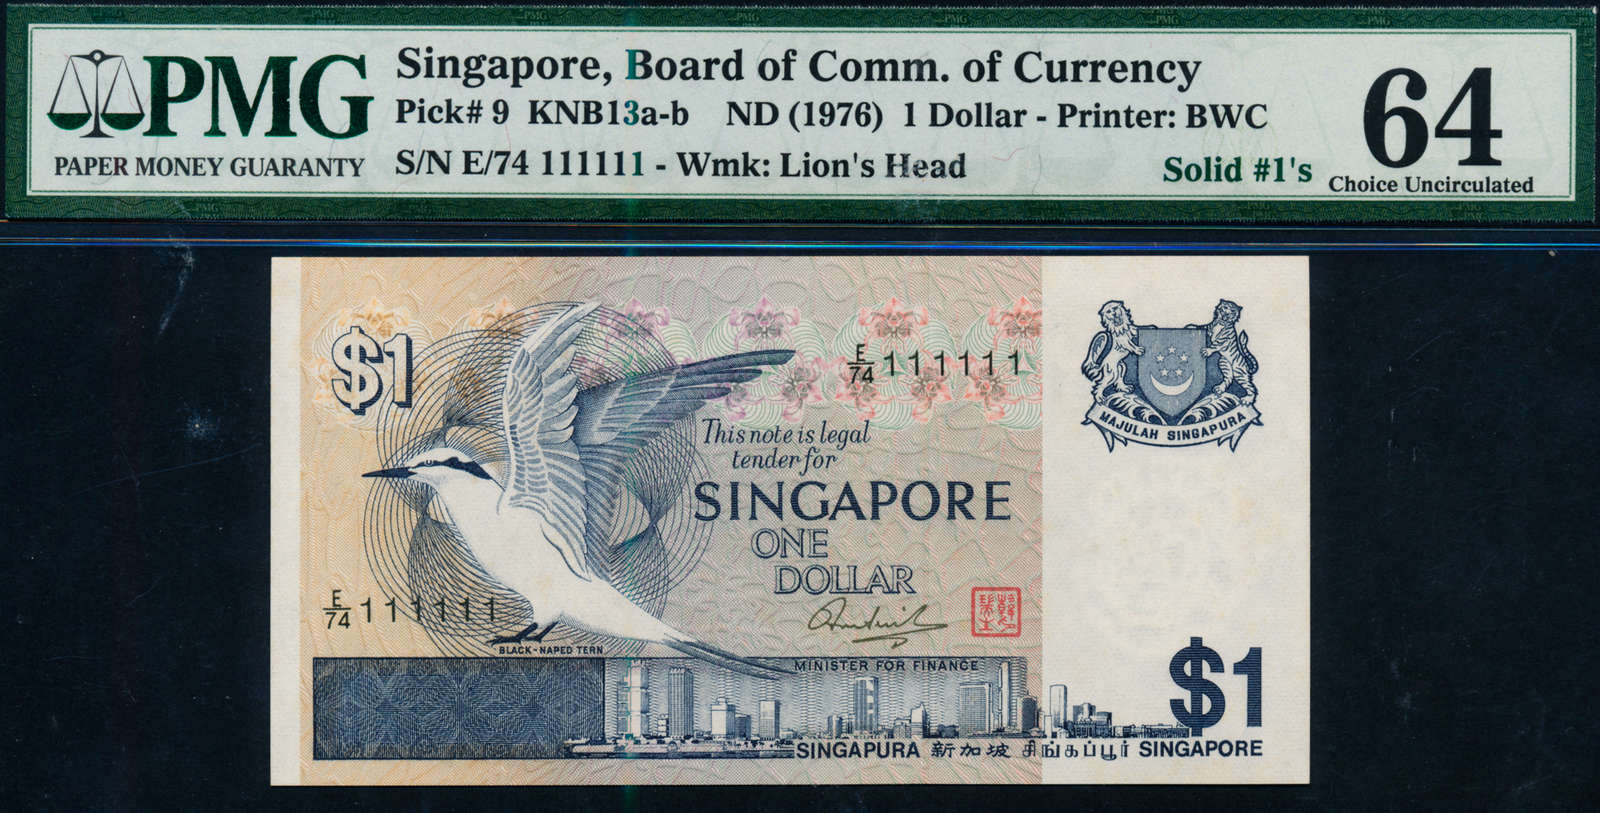 Singapore Bird 1976 $1 Solid Number E/74 111111 PMG 64 